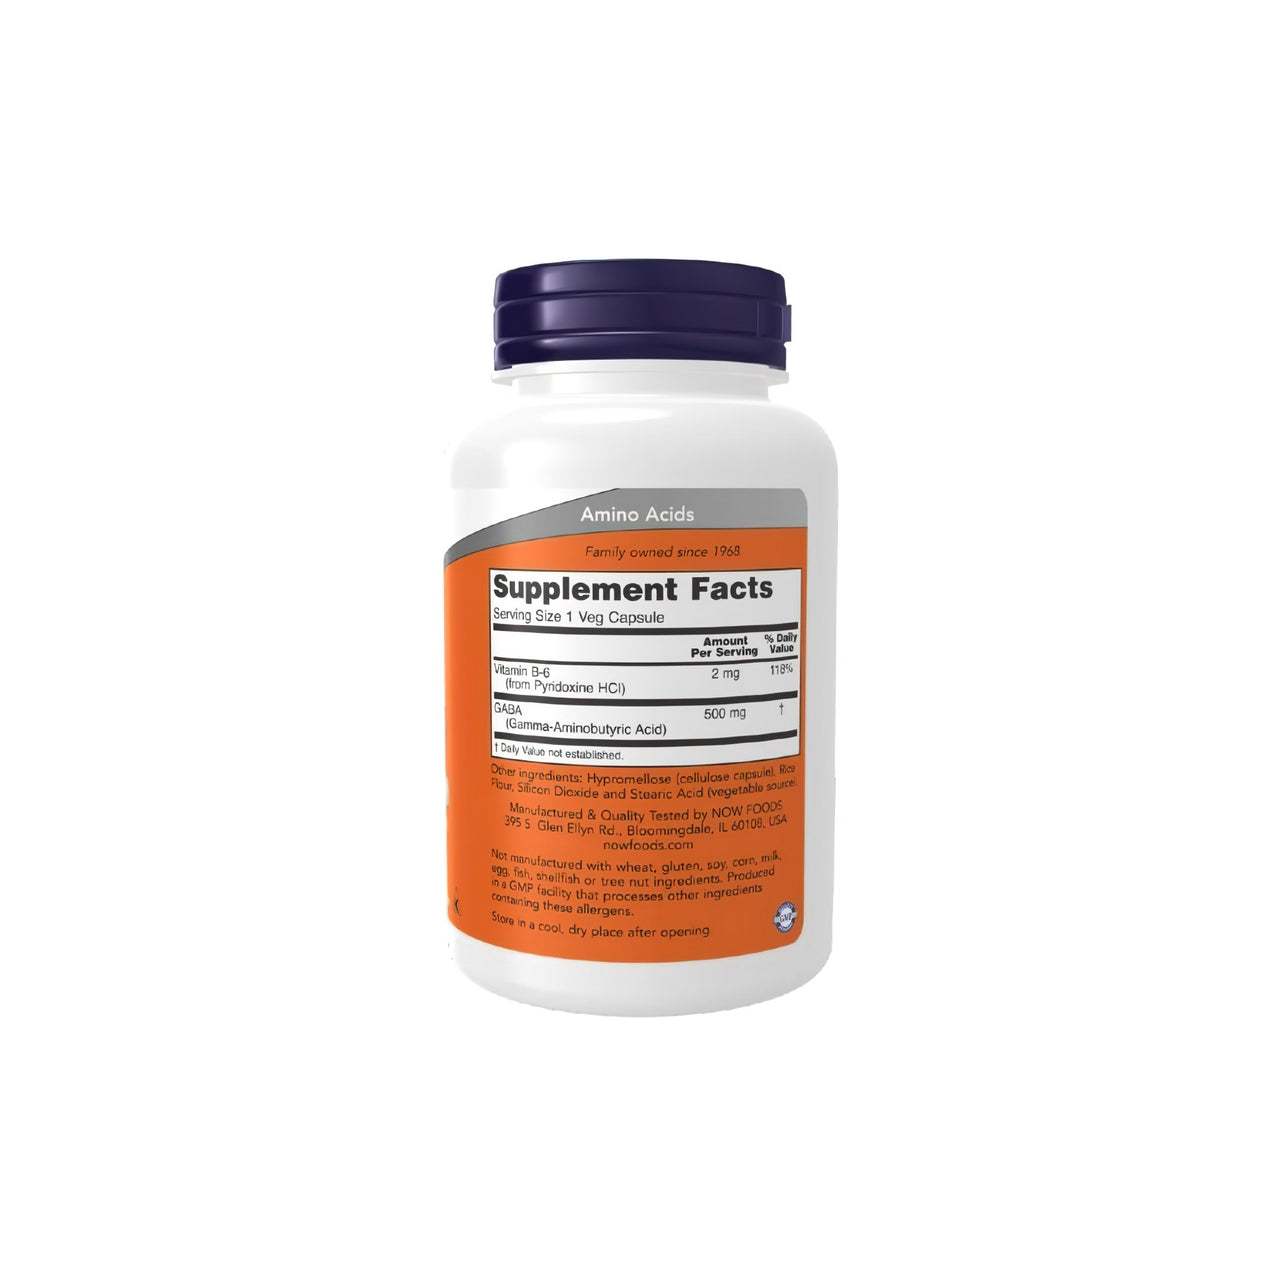 A bottle of GABA 500 mg 200 Vegetable Capsules by Now Foods on a white background, promoting relaxation.